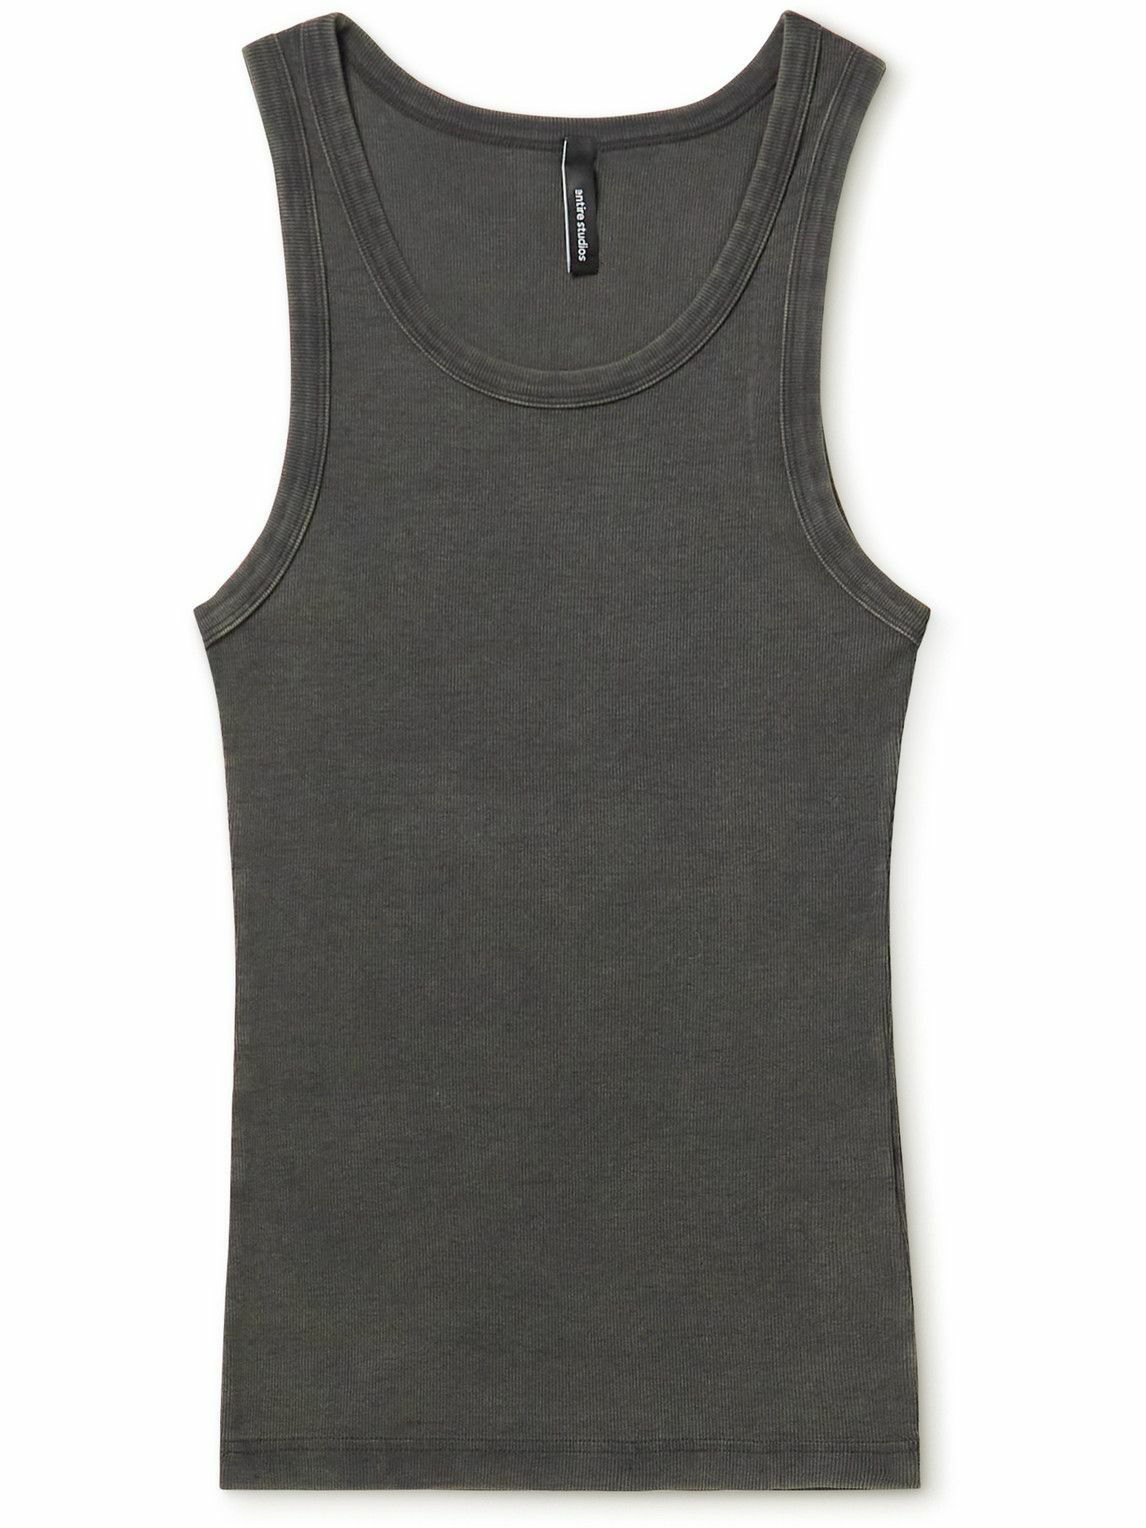 Entire Studios - Garment-Dyed Ribbed Stretch Cotton-Jersey Tank Top - Black  Entire Studios